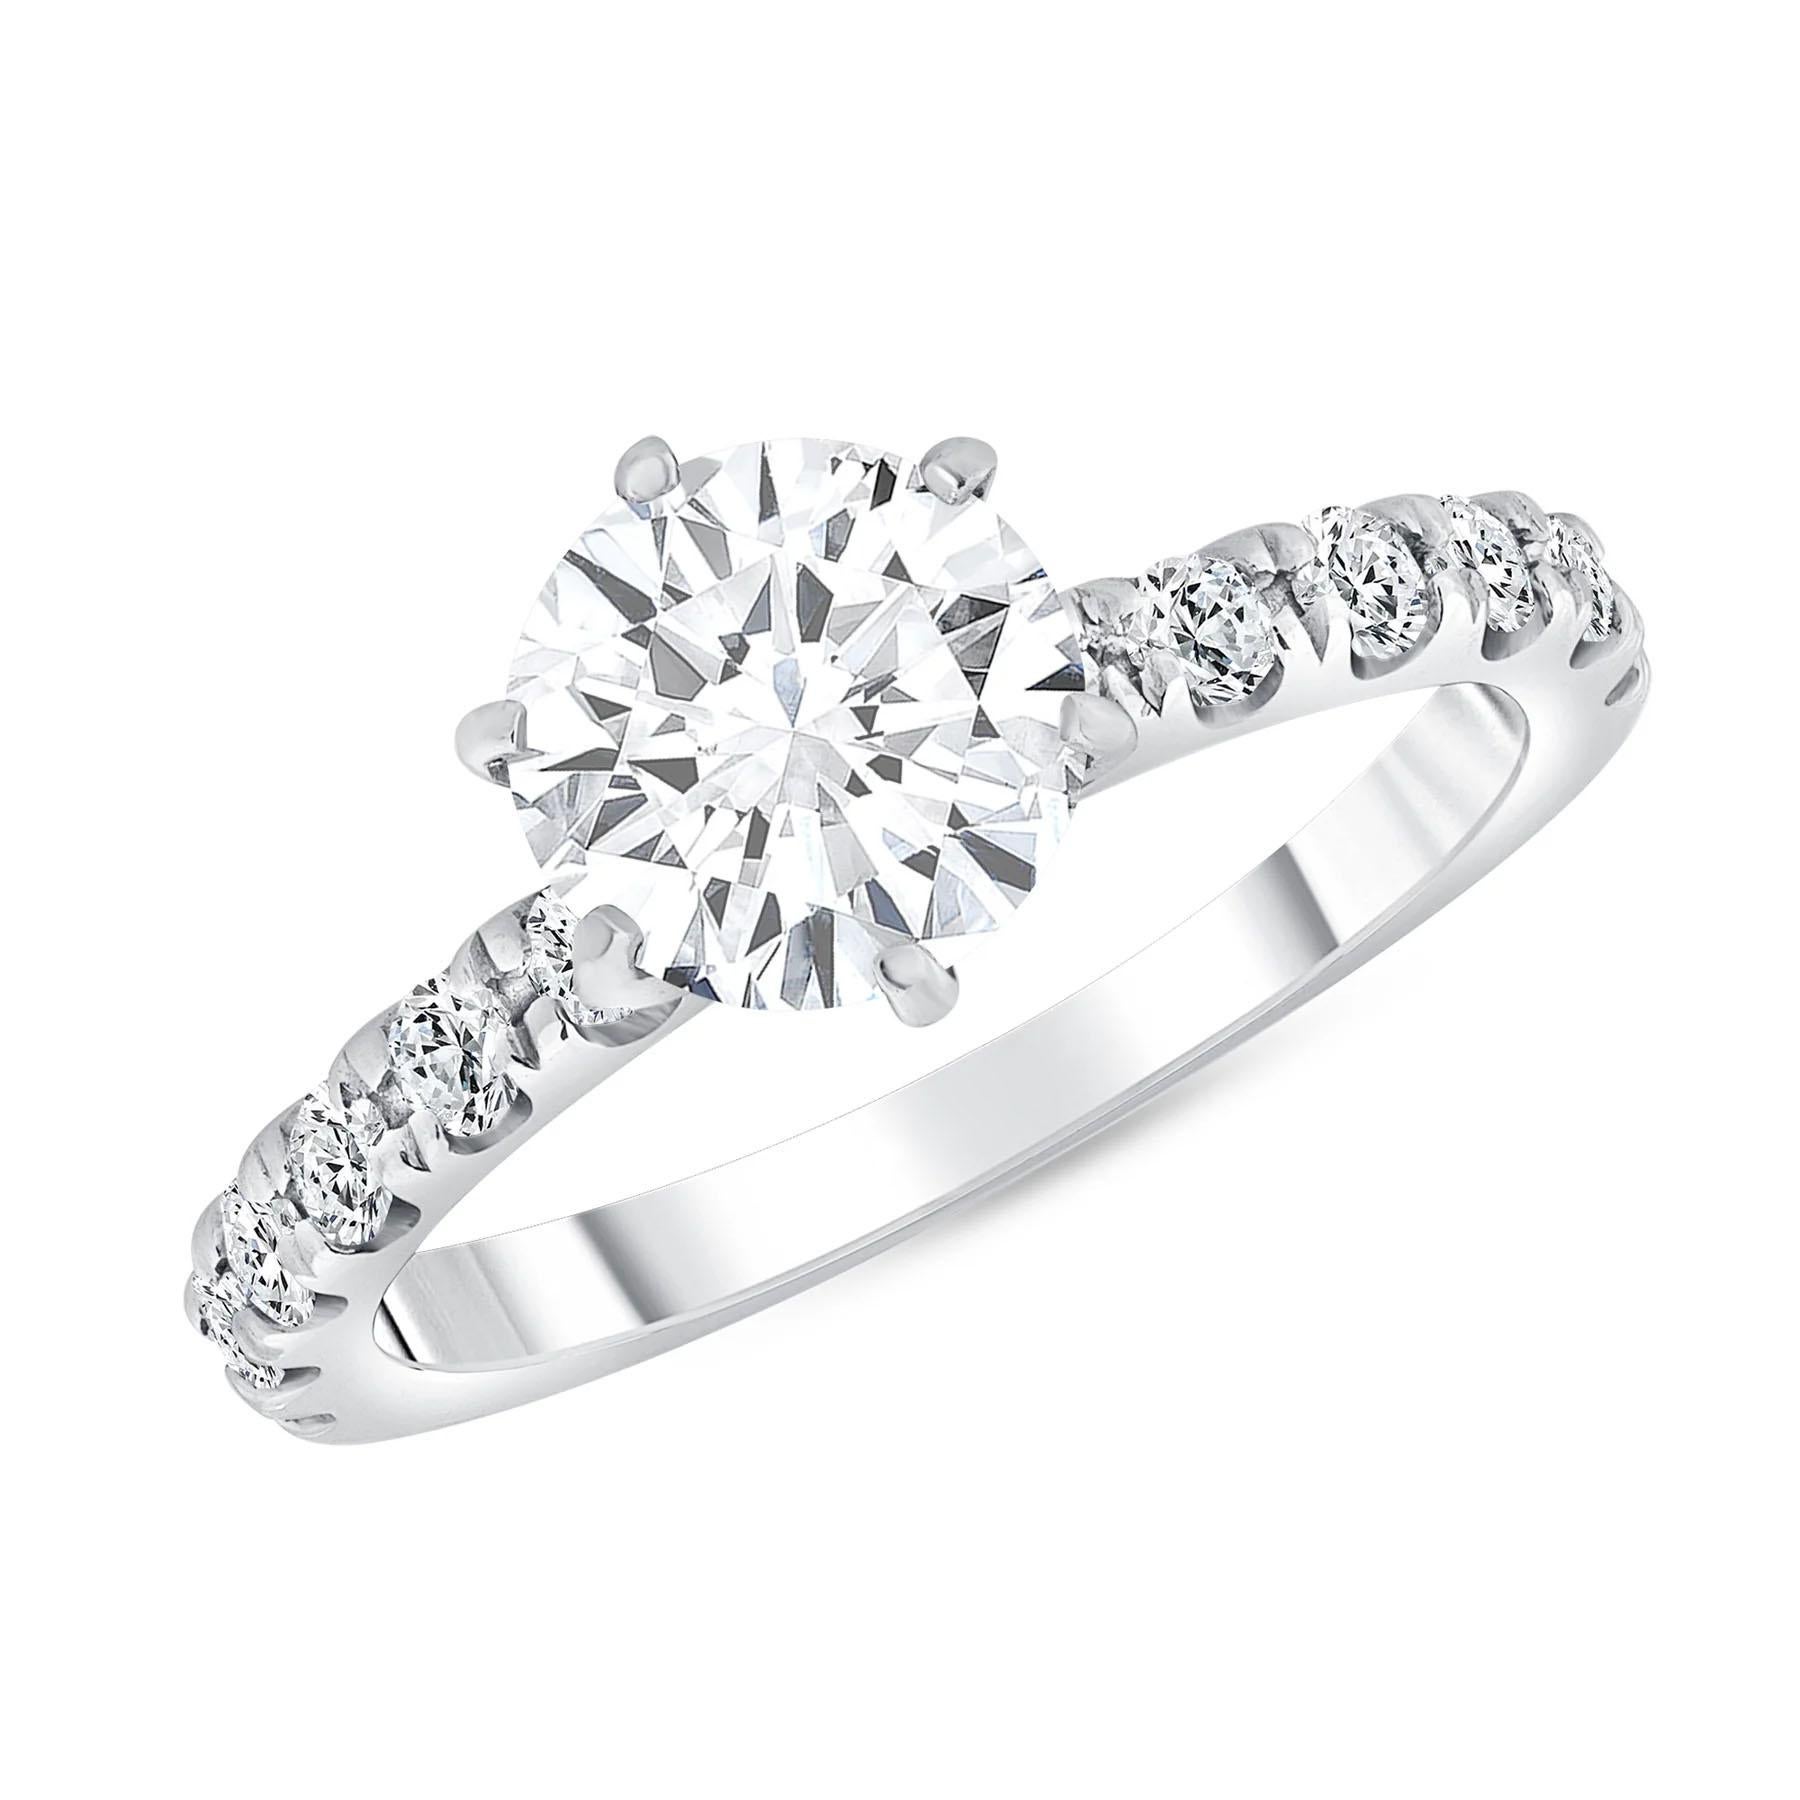 For Sale:  Rylie's Solitaire Engagement Ring 6-prong Half-eternity 4